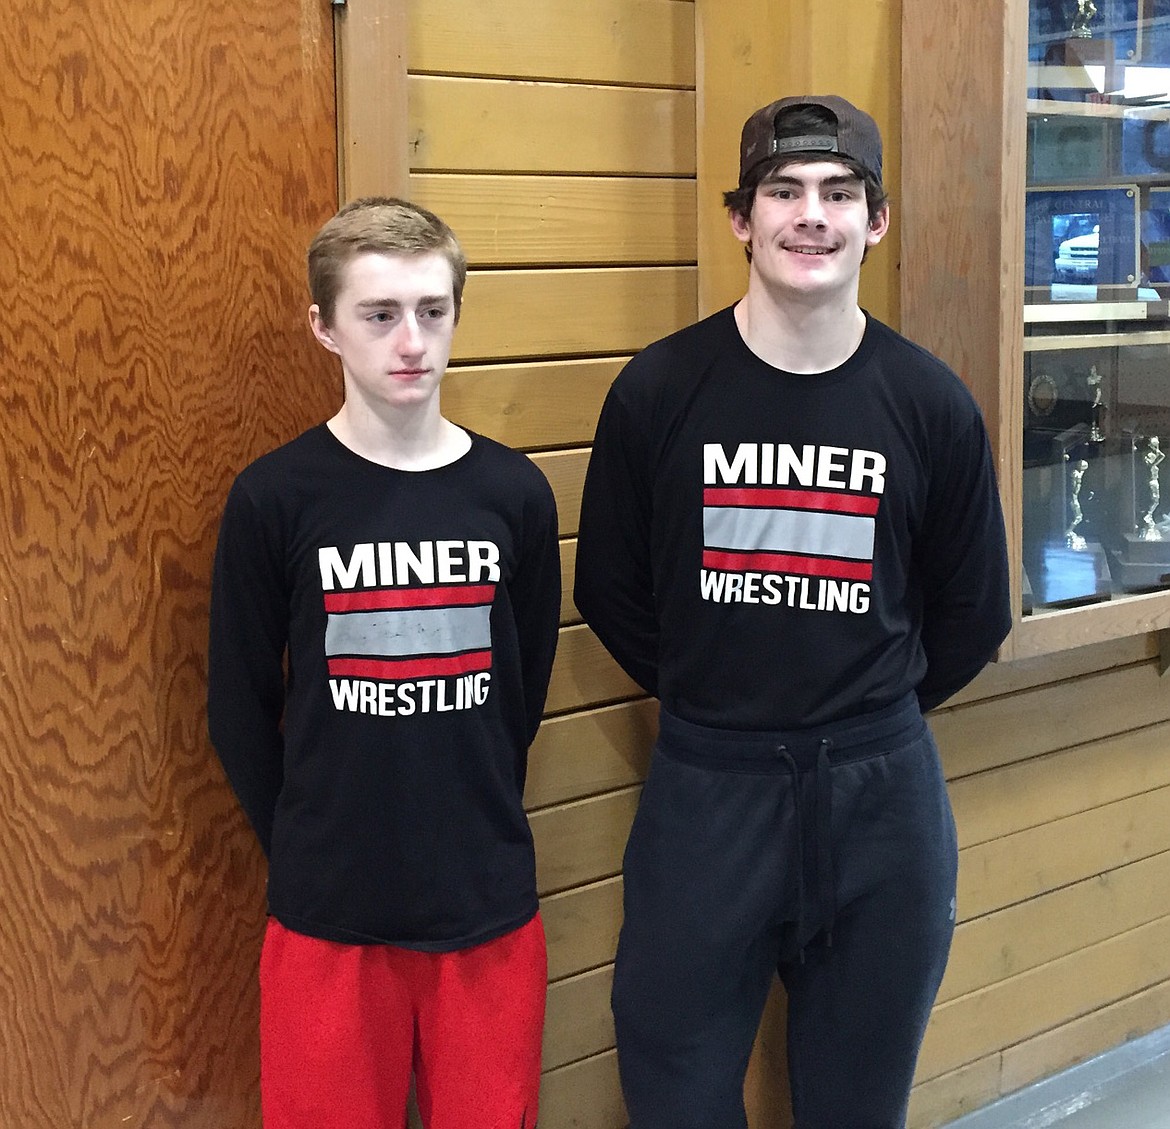 Courtesy photo
Wallace wrestlers Austin McKinnon and Stetson Crewdson qualified for the state tournament by placing in first and second respectively at their district tournament at Grangeville High School. Also qualifying, but not pictured is Myles Hayman.